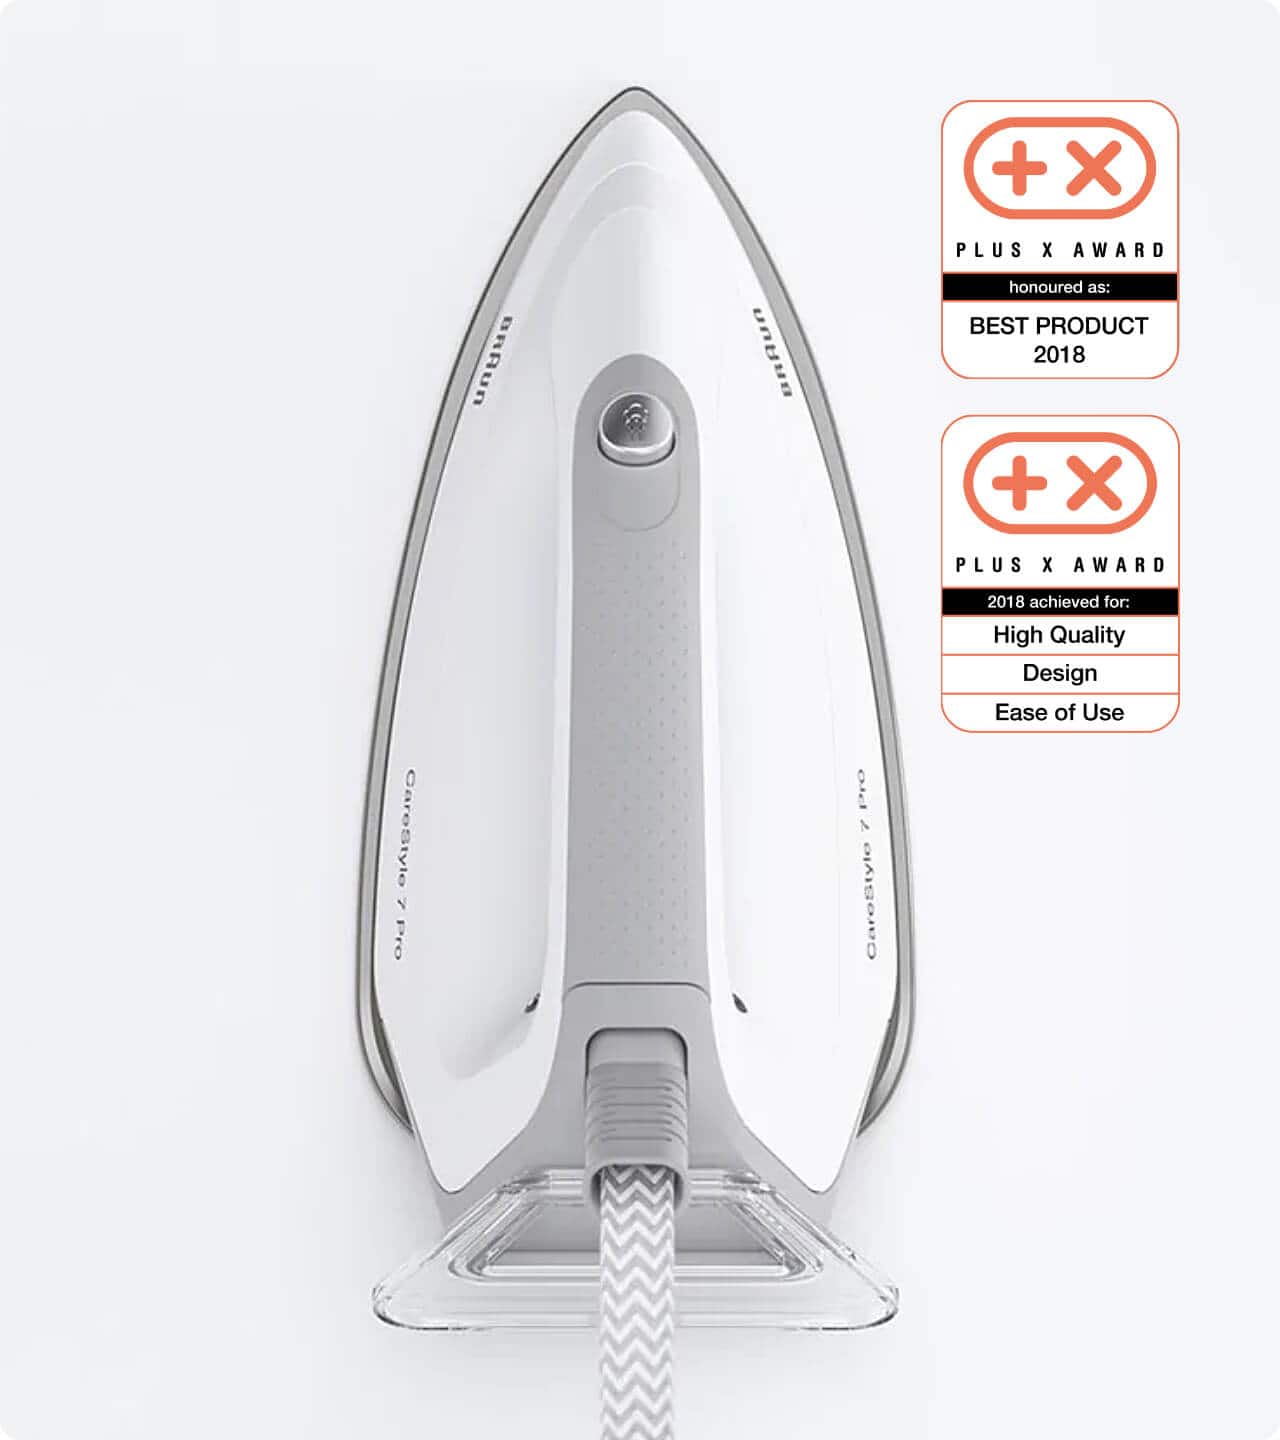 Braun CareStyle 7 steam generator iron – Awarded as the best.